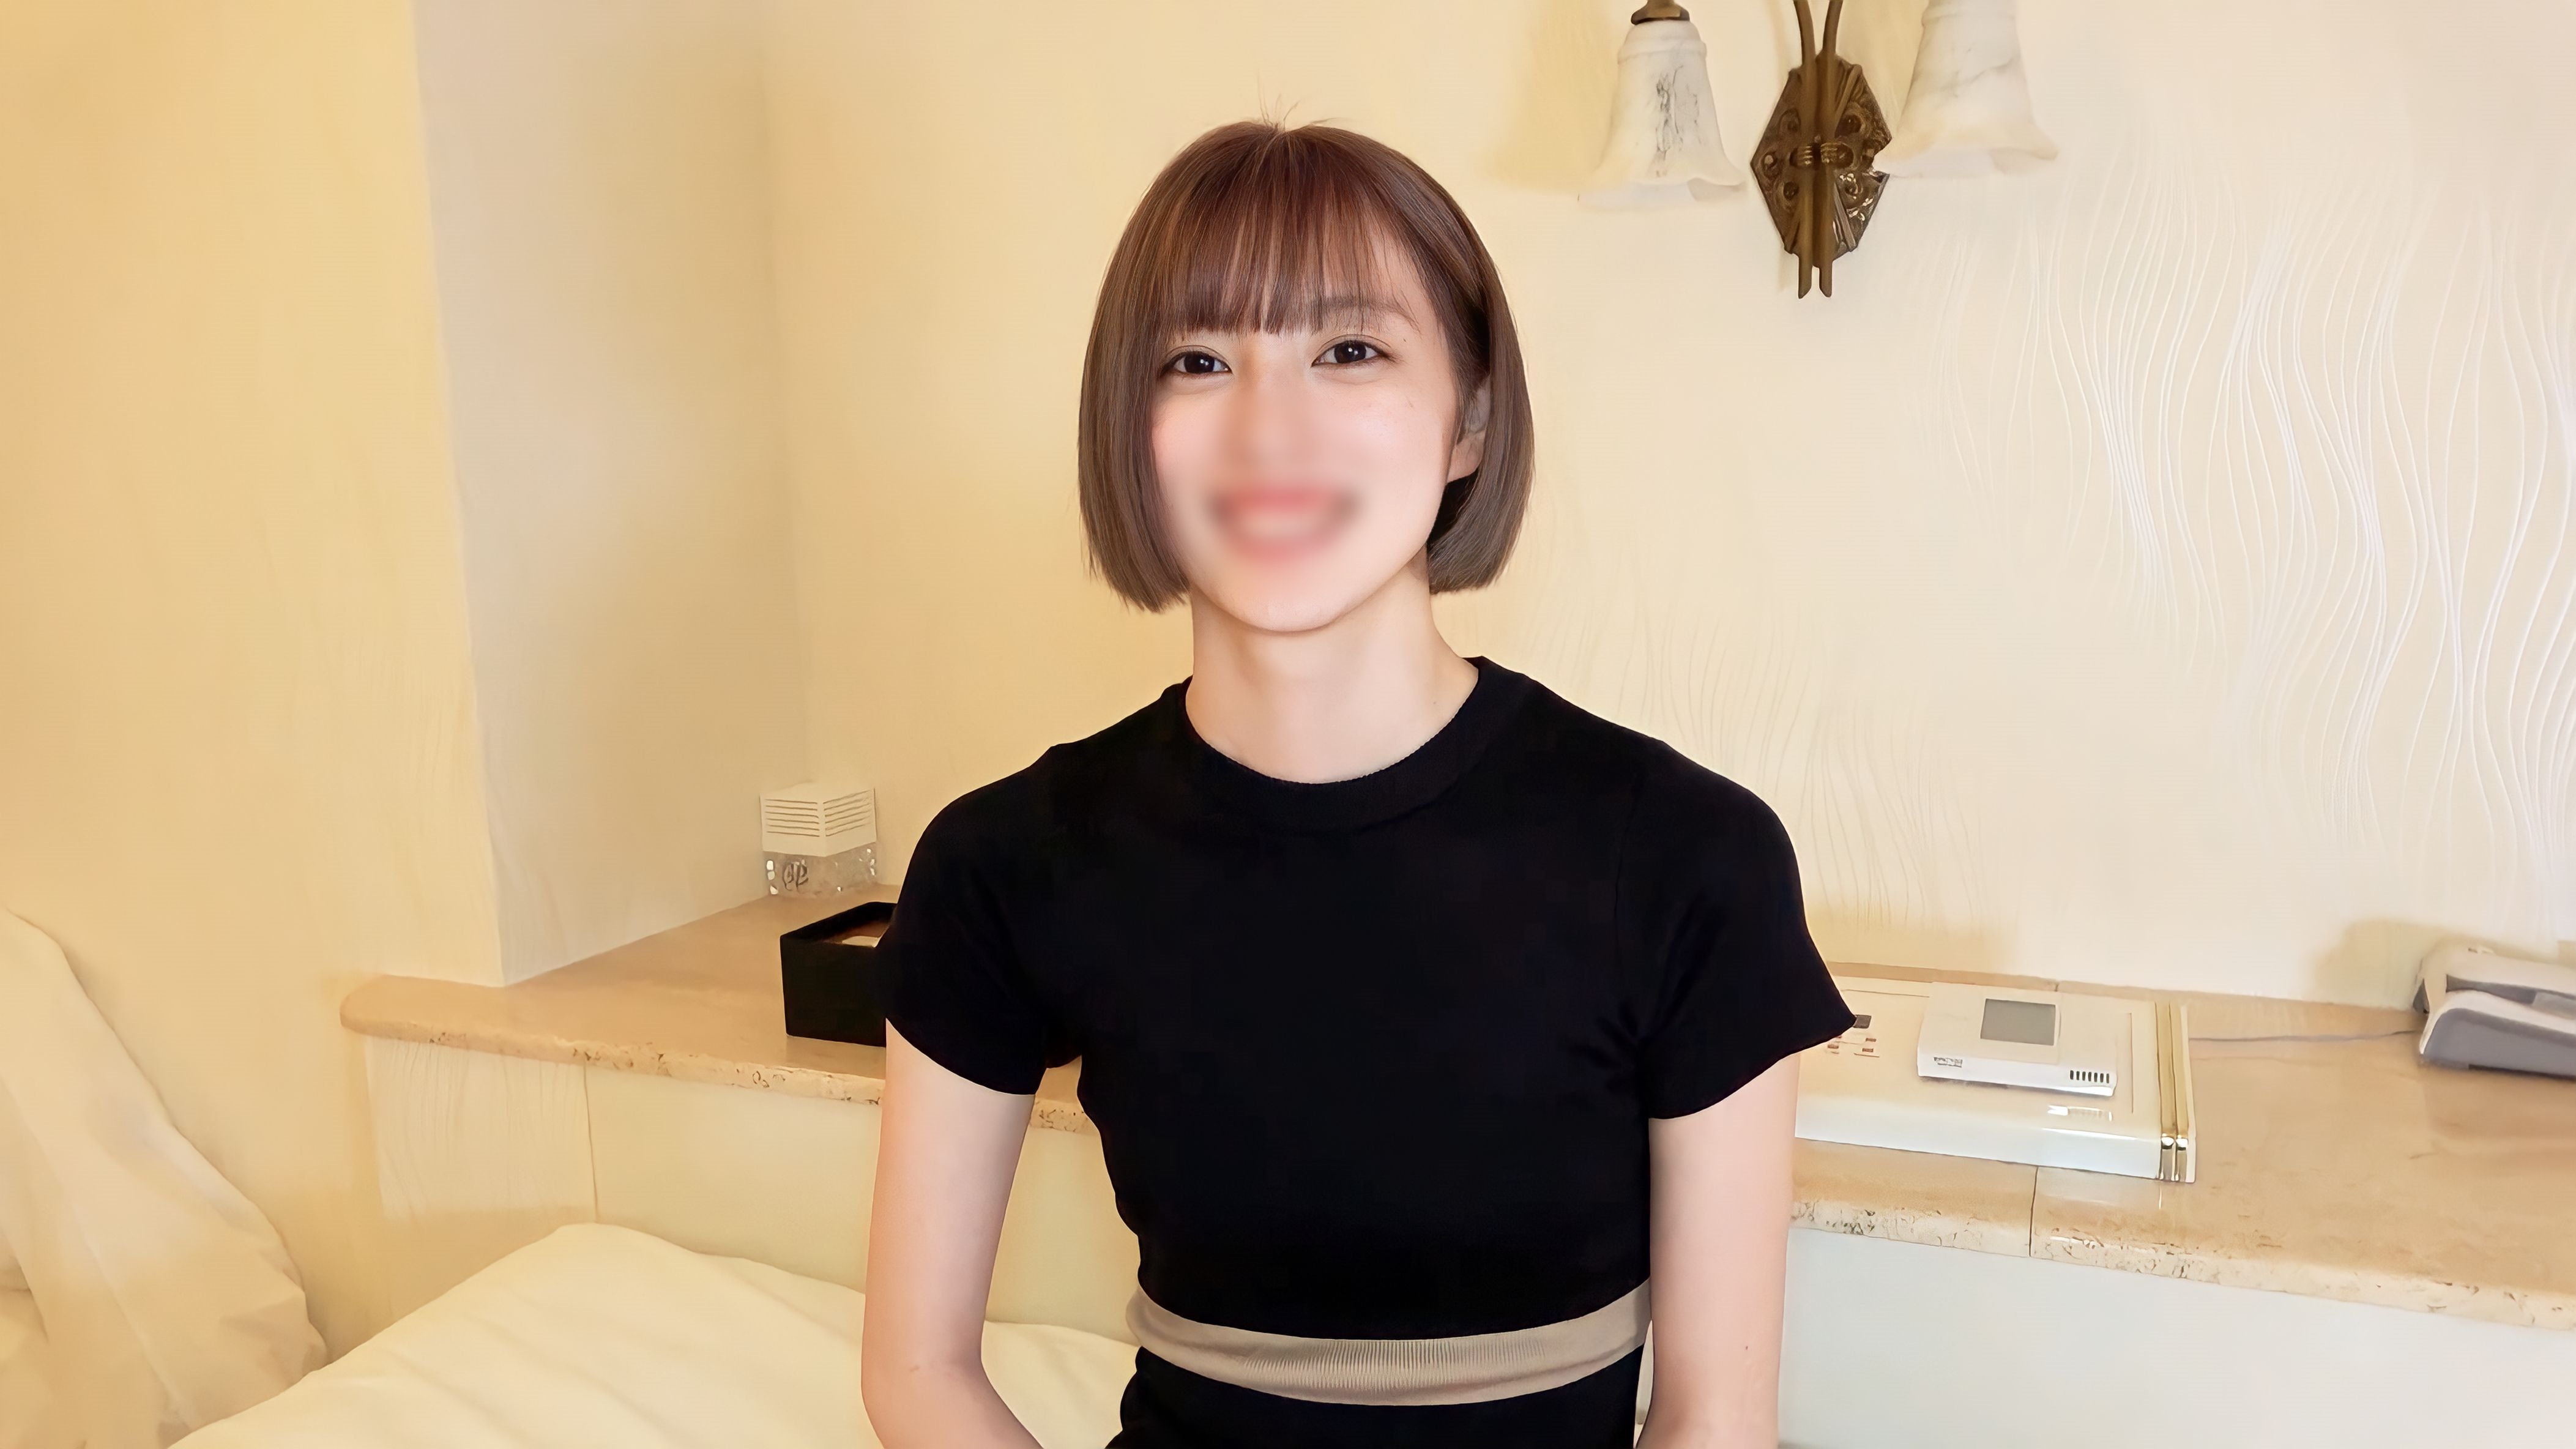 No We meet again with the girl who looks like a celebrity looks like a cockroach who has had her hair cut and has had a makeover This time after some negotiations the creampie ban has been lifted She swallows on the bed has raw sex in the bath and finally cums in the end SEX bonus high quality